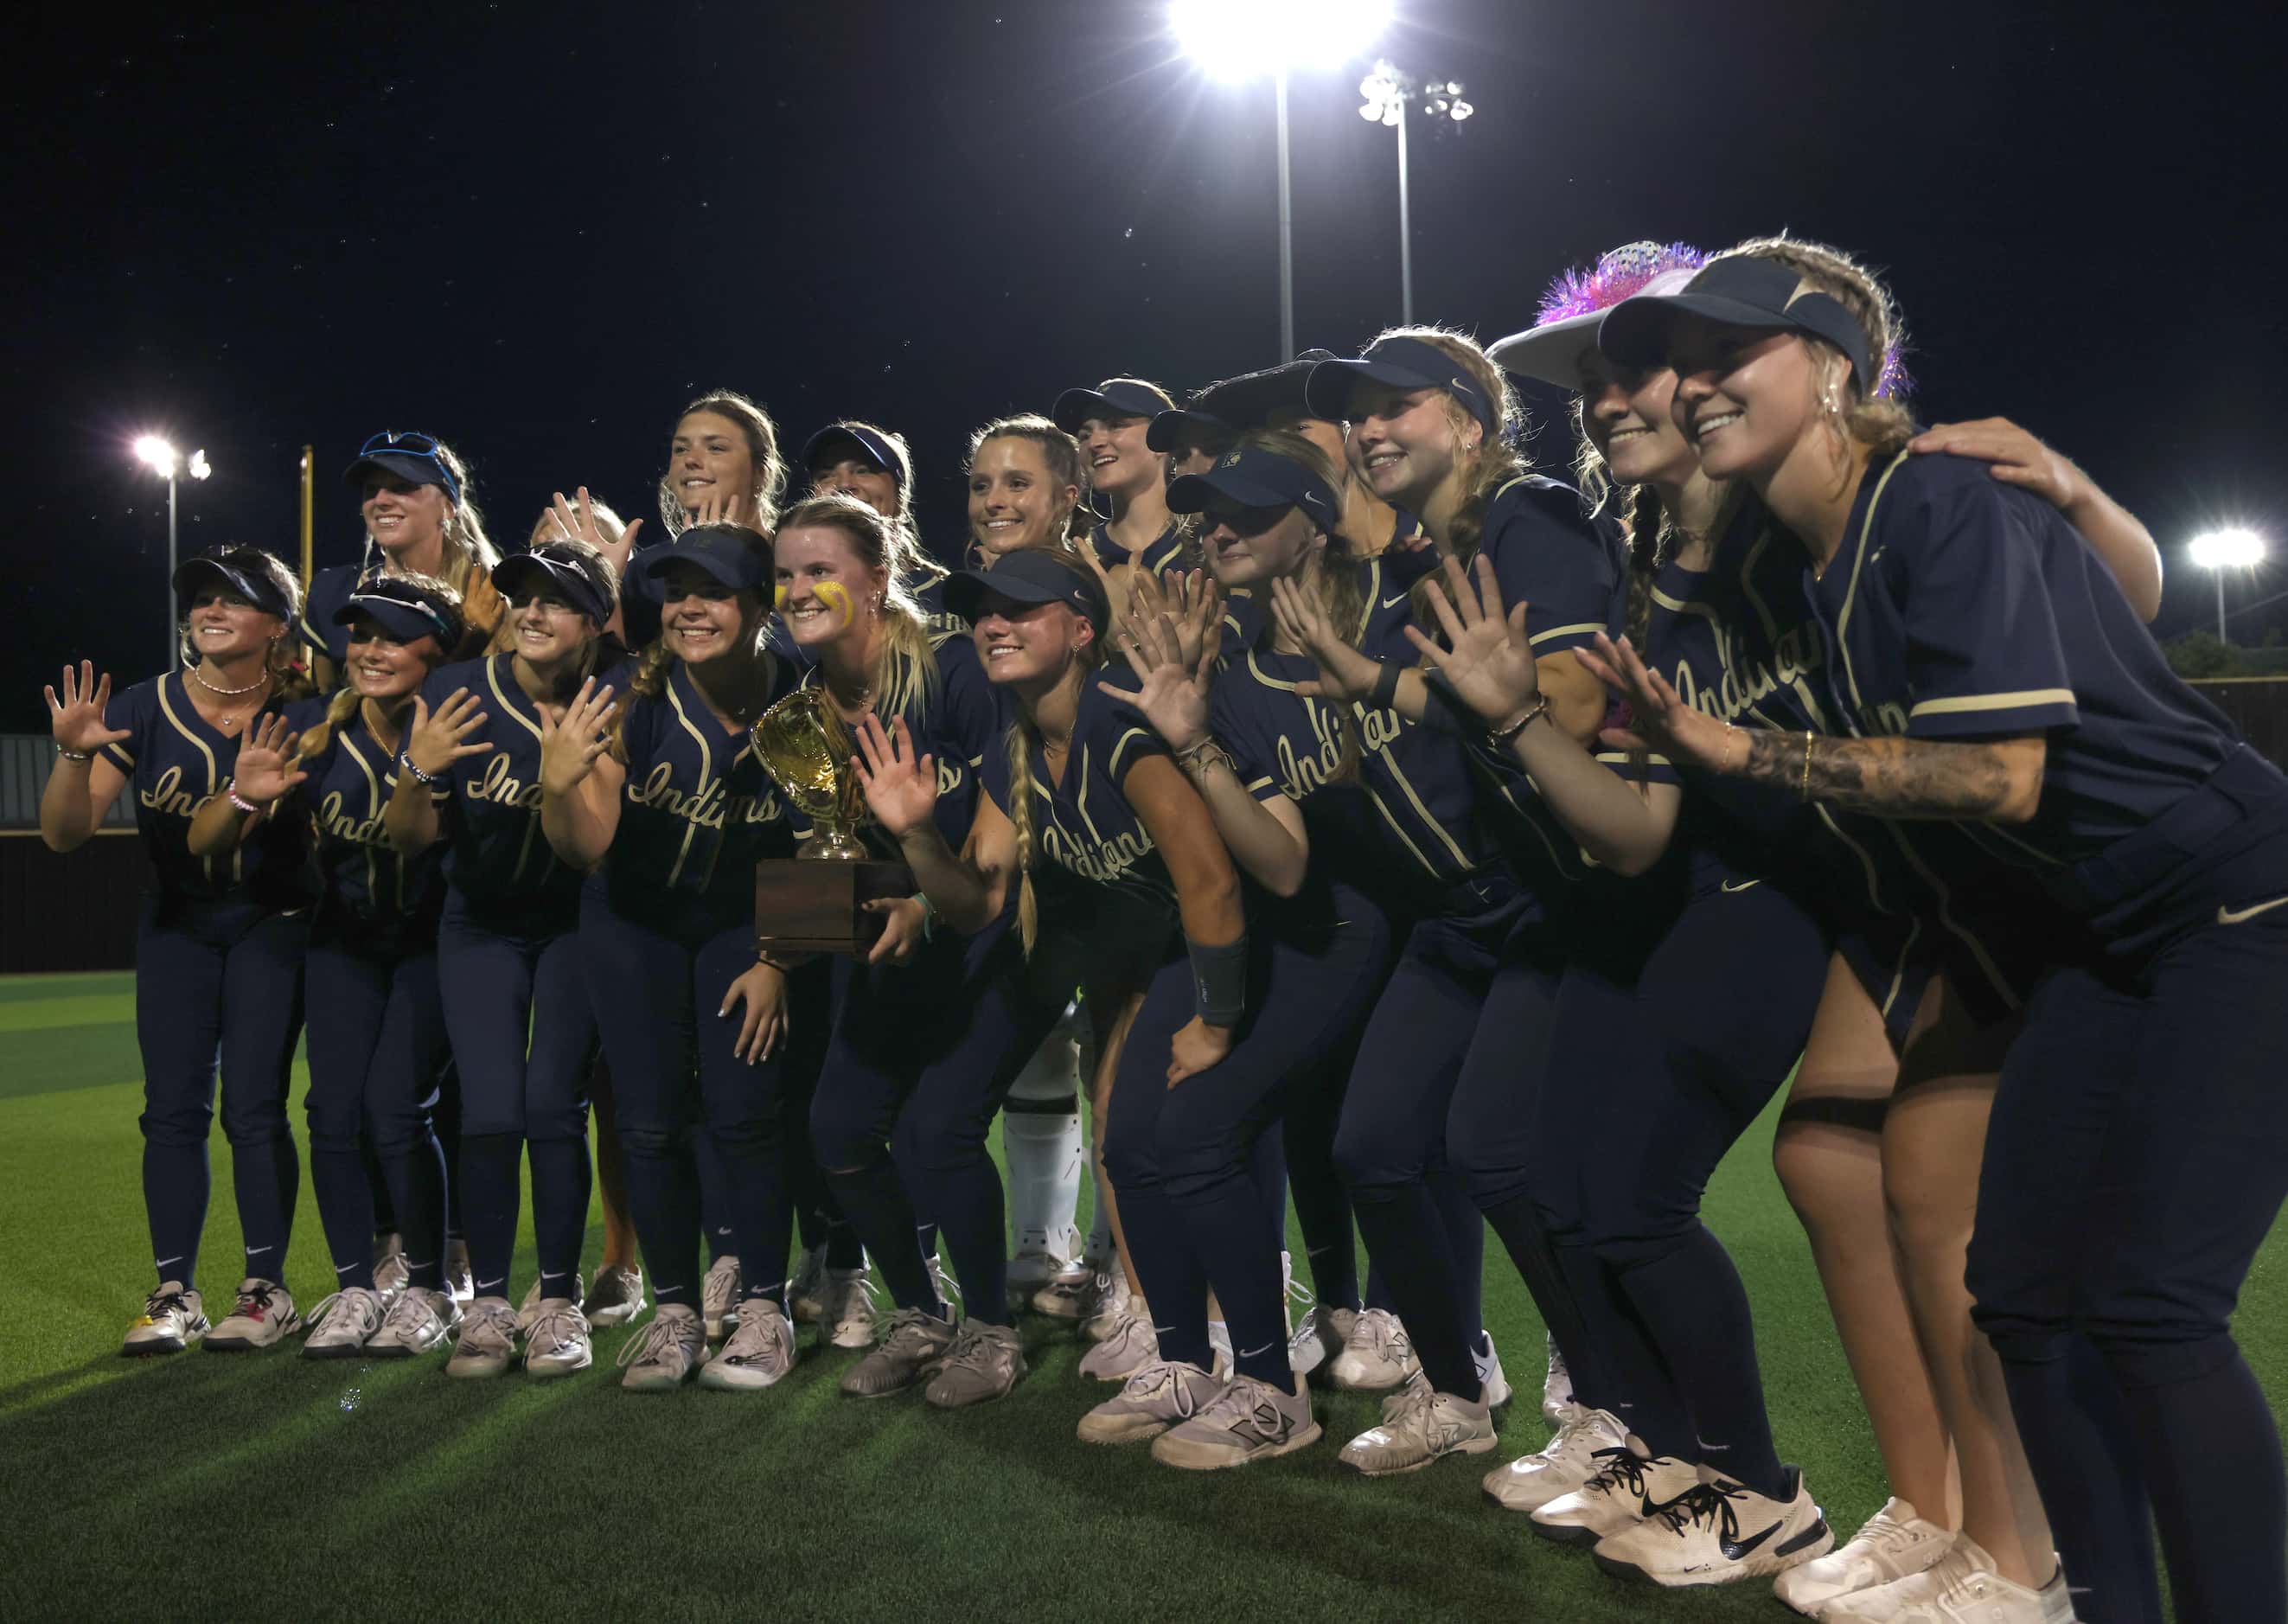 Keller players pose for a photo after their 10-0 victory over Plano West in 6 innings to...